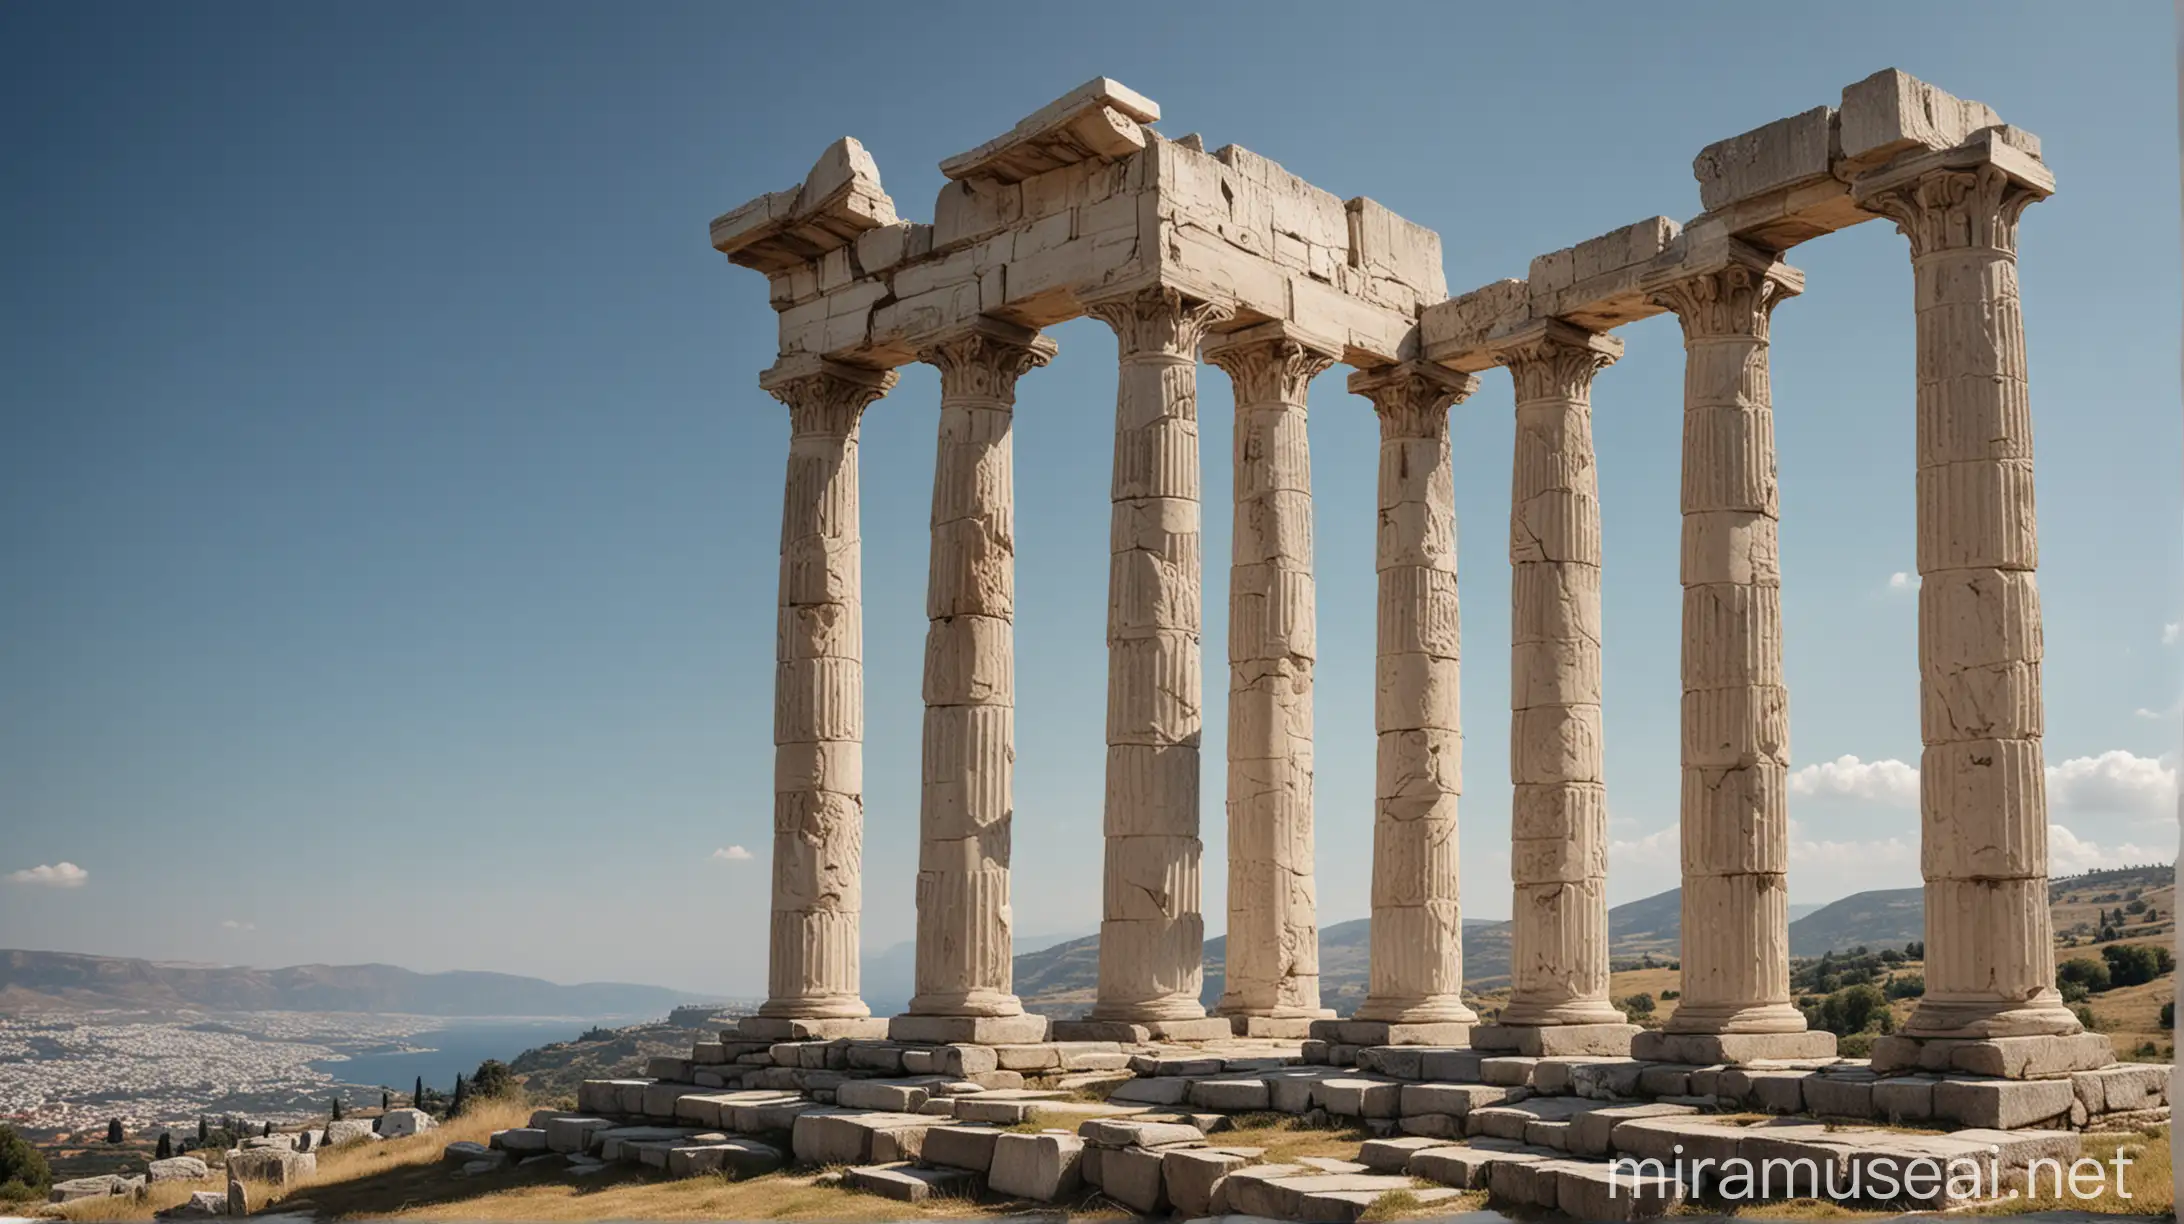 at the top of the hill, three Greek columns stand in a row, connected at the top by a lintel. the pillars are mighty and beautiful. in the background is a landscape and a sunny day. the sky is cloudless.